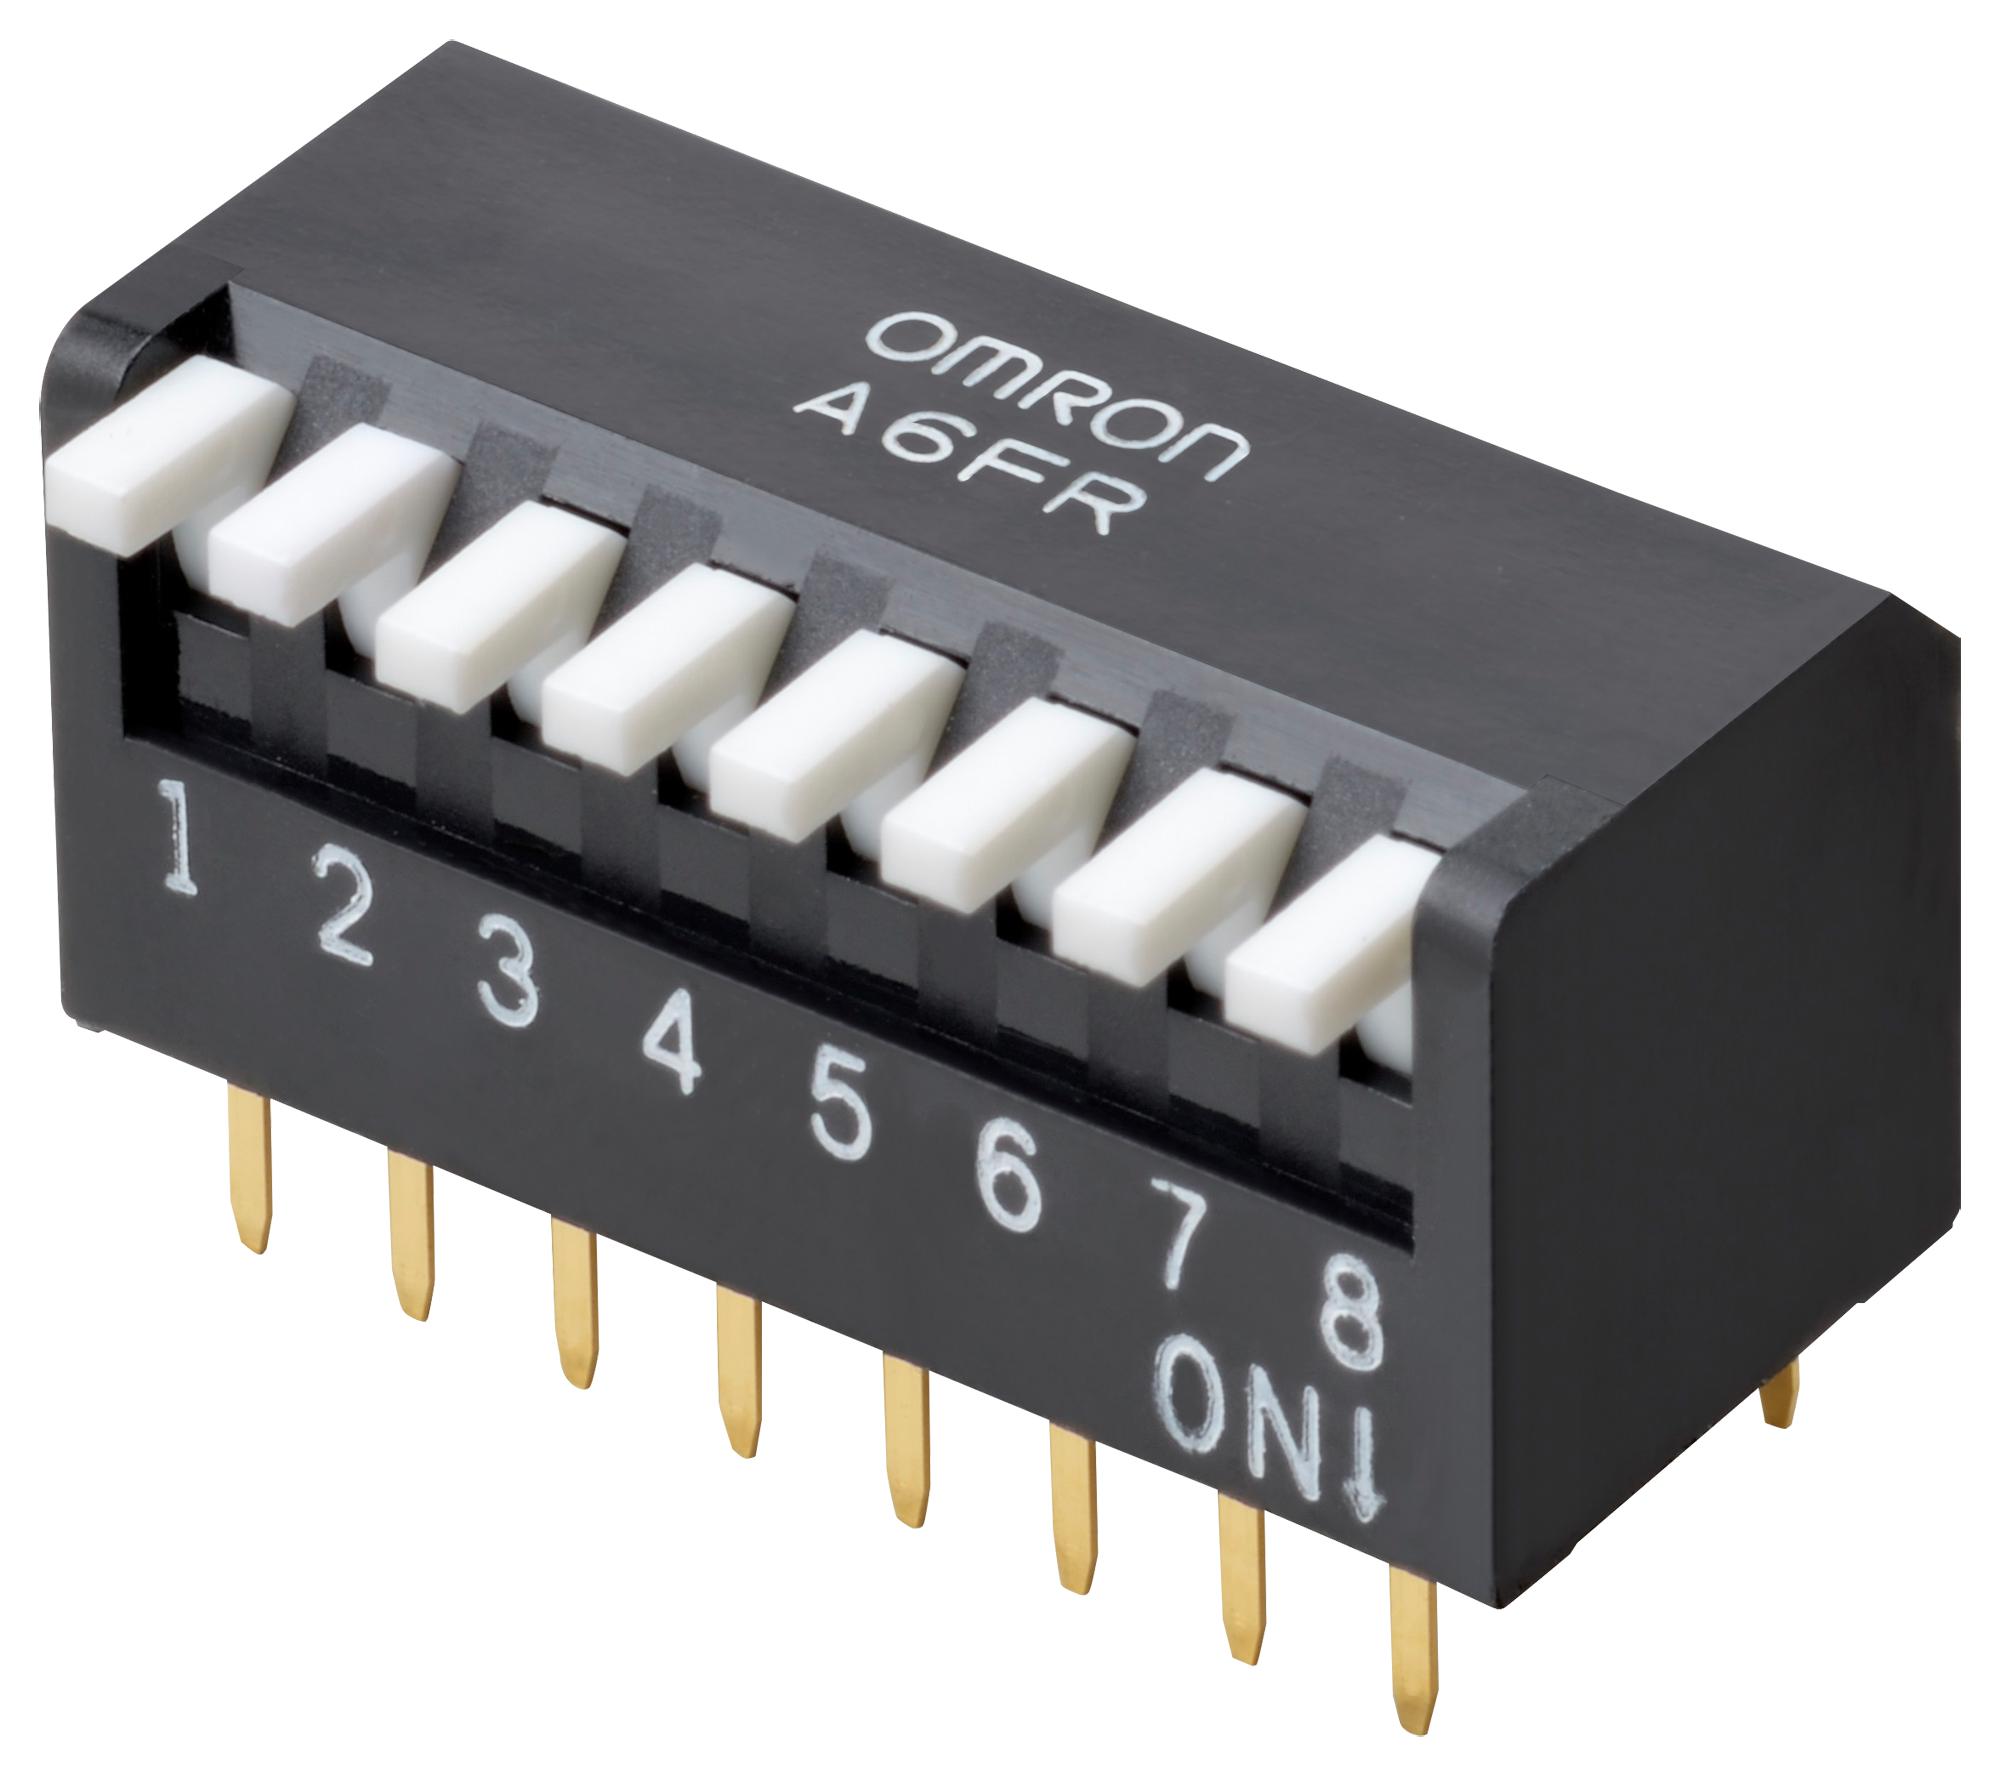 A6FR-4104 DIP SWITCH, 4POS, SPST, PIANO KEY, TH OMRON